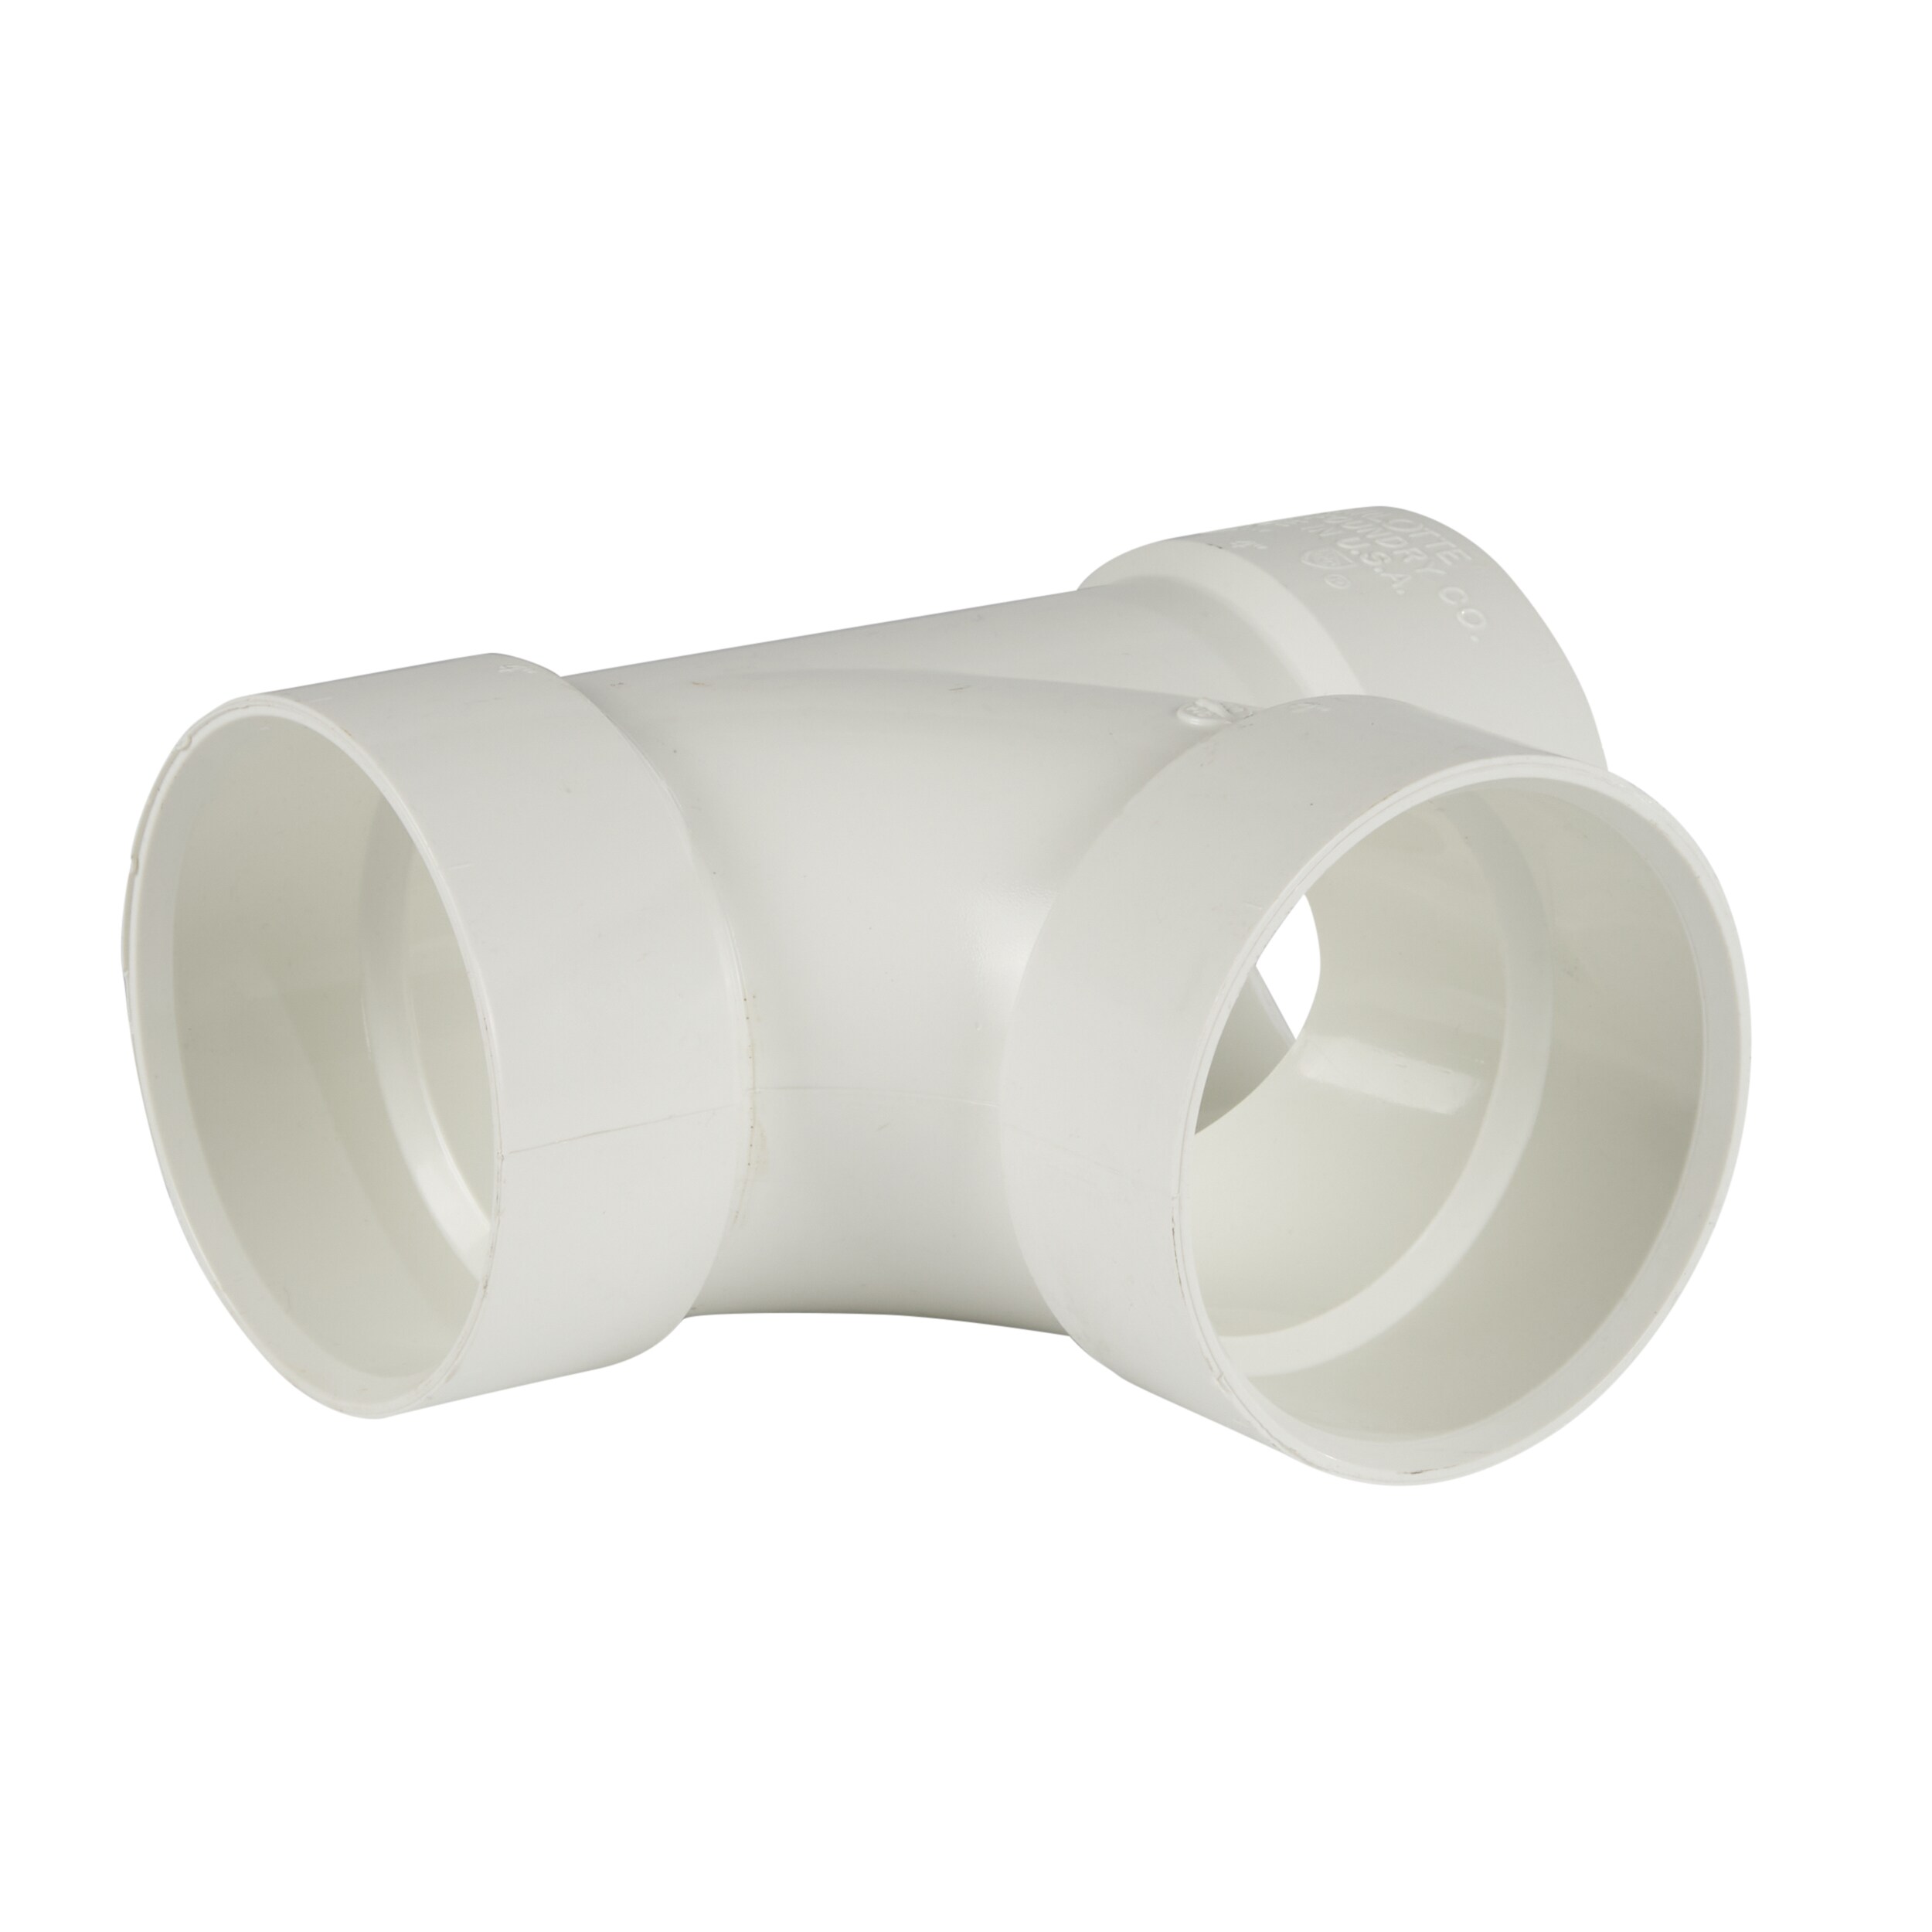 Waste Pipe Fittings 45 DEG for 36mm x 10 for Standard UK Solvent Weld Waste Pipe 